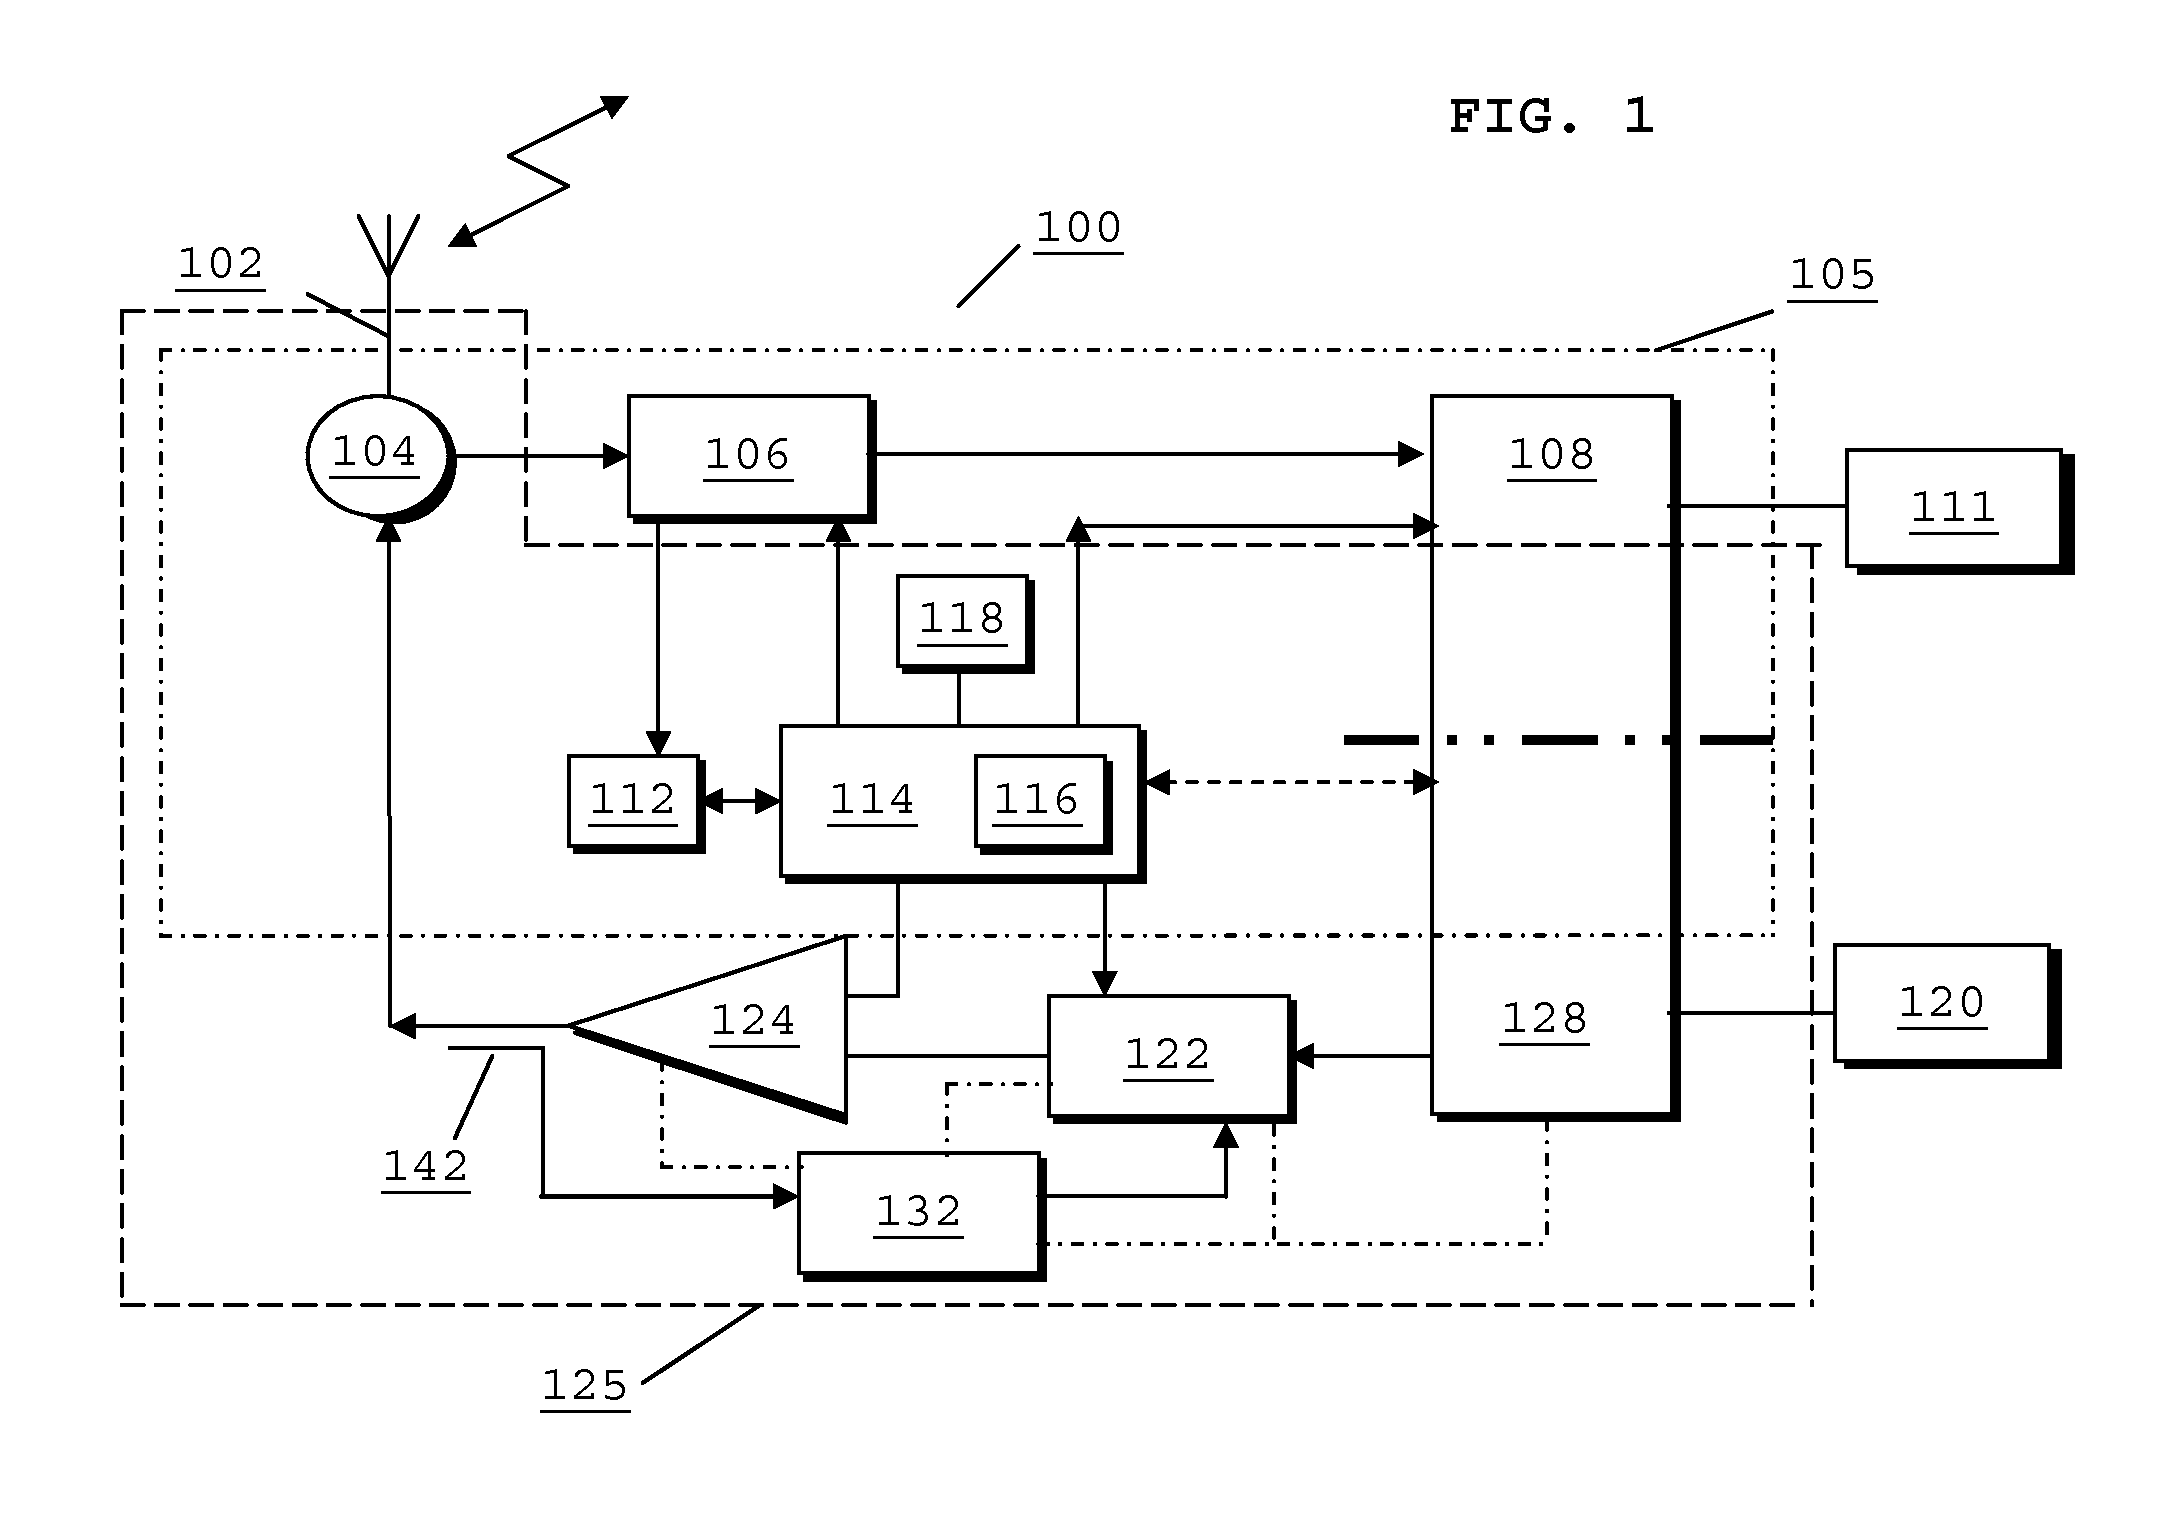 Wireless communication unit, integrated circuit and method of power control of a power amplifier therefor